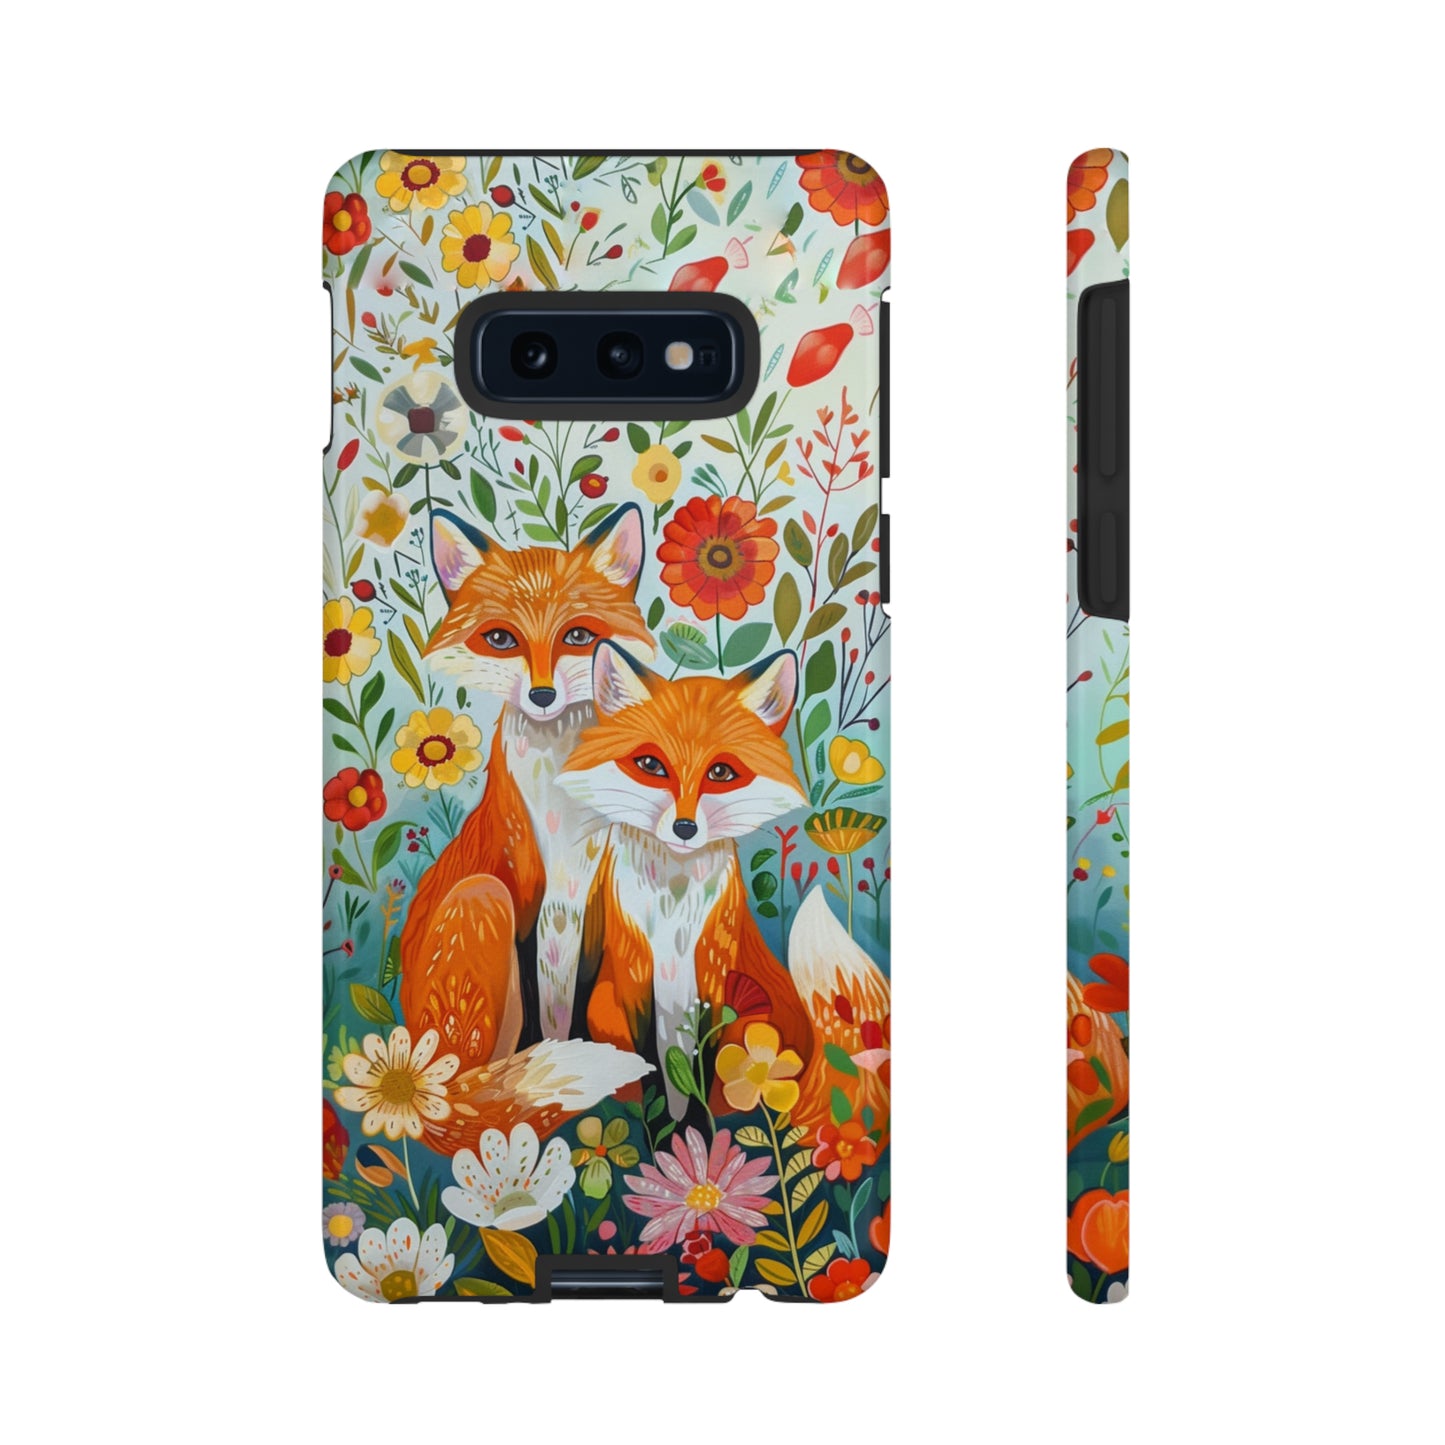 Foxes in the Floral Garden Phone Case